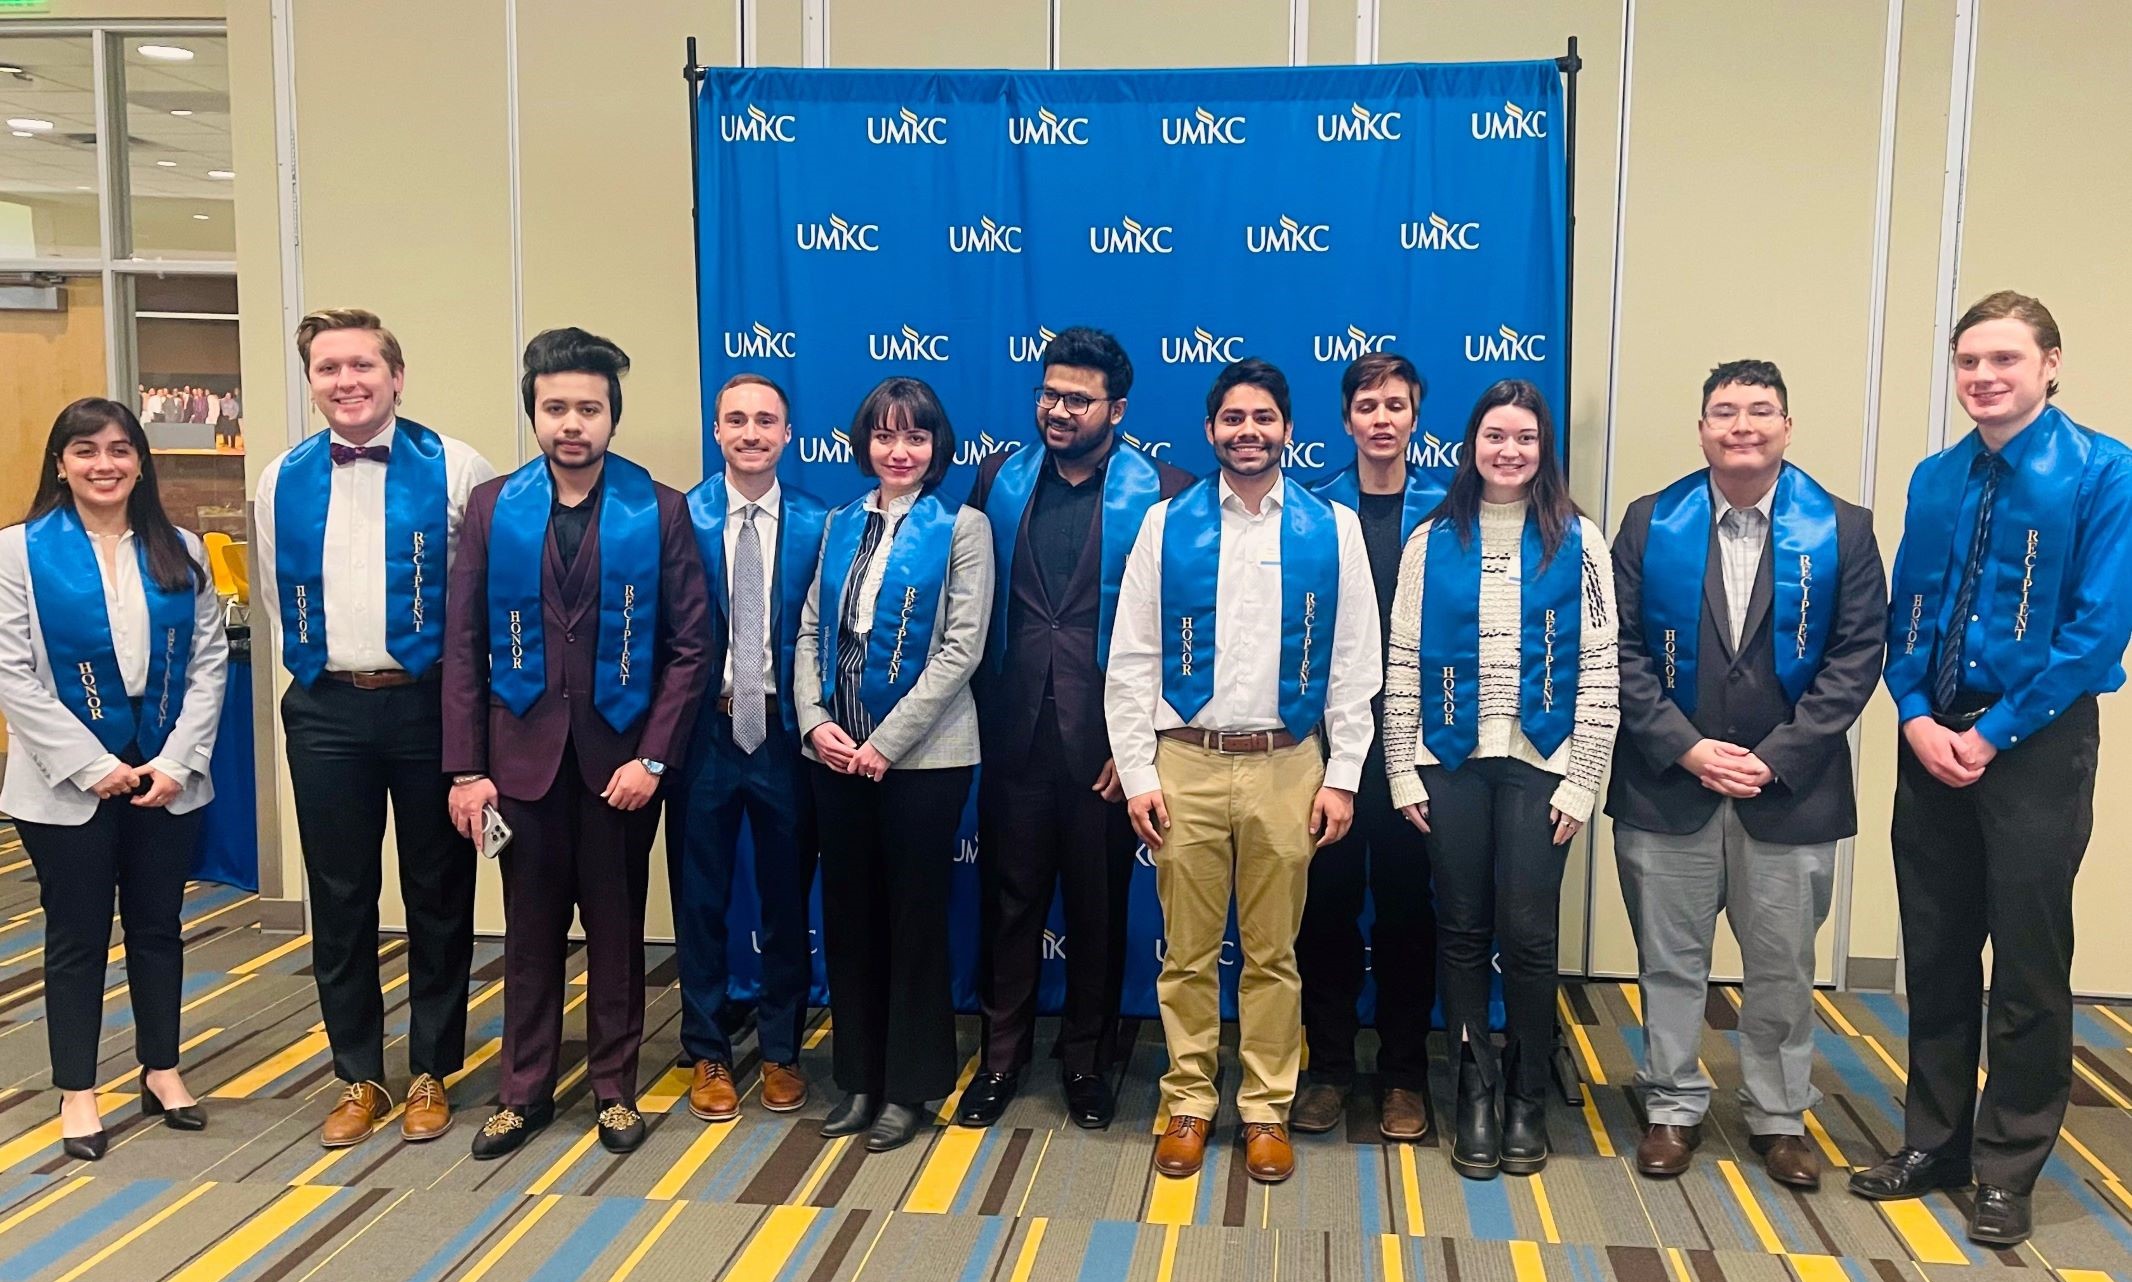 Fifteen students pose for a photo in front of a UMKC backdrop